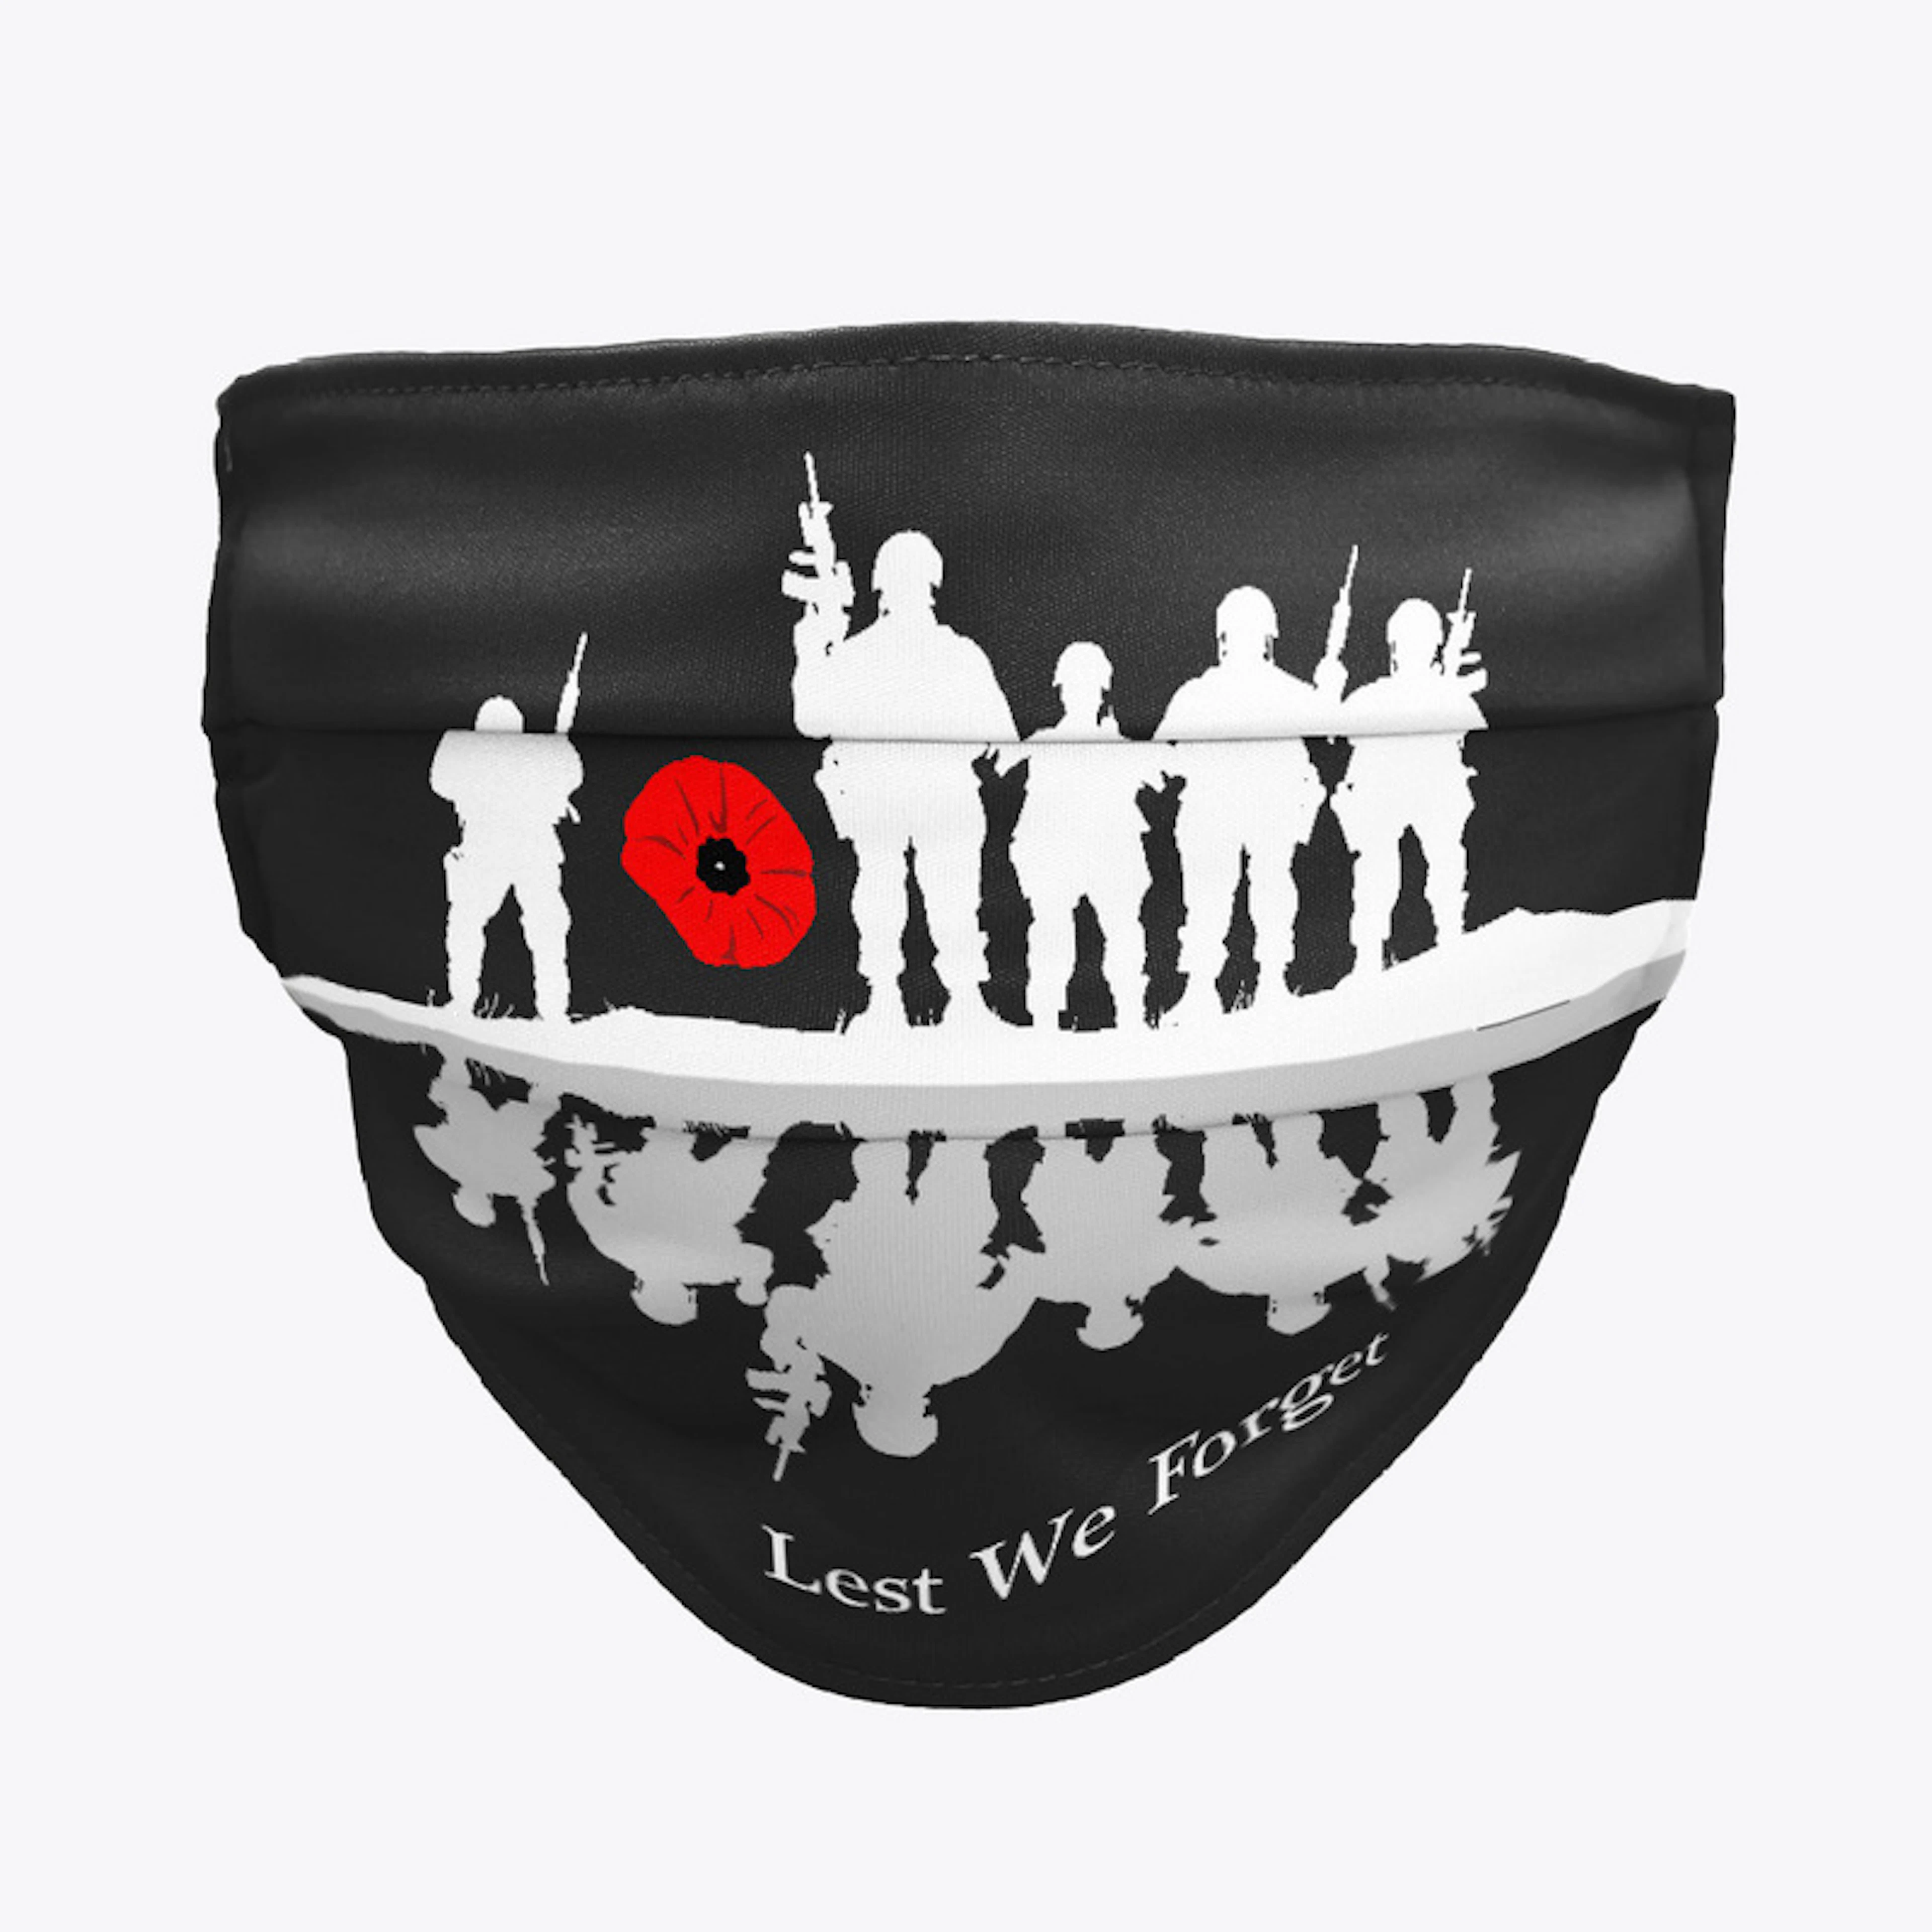 LEST WE FORGET. REMEMBRANCE POPPY MASK